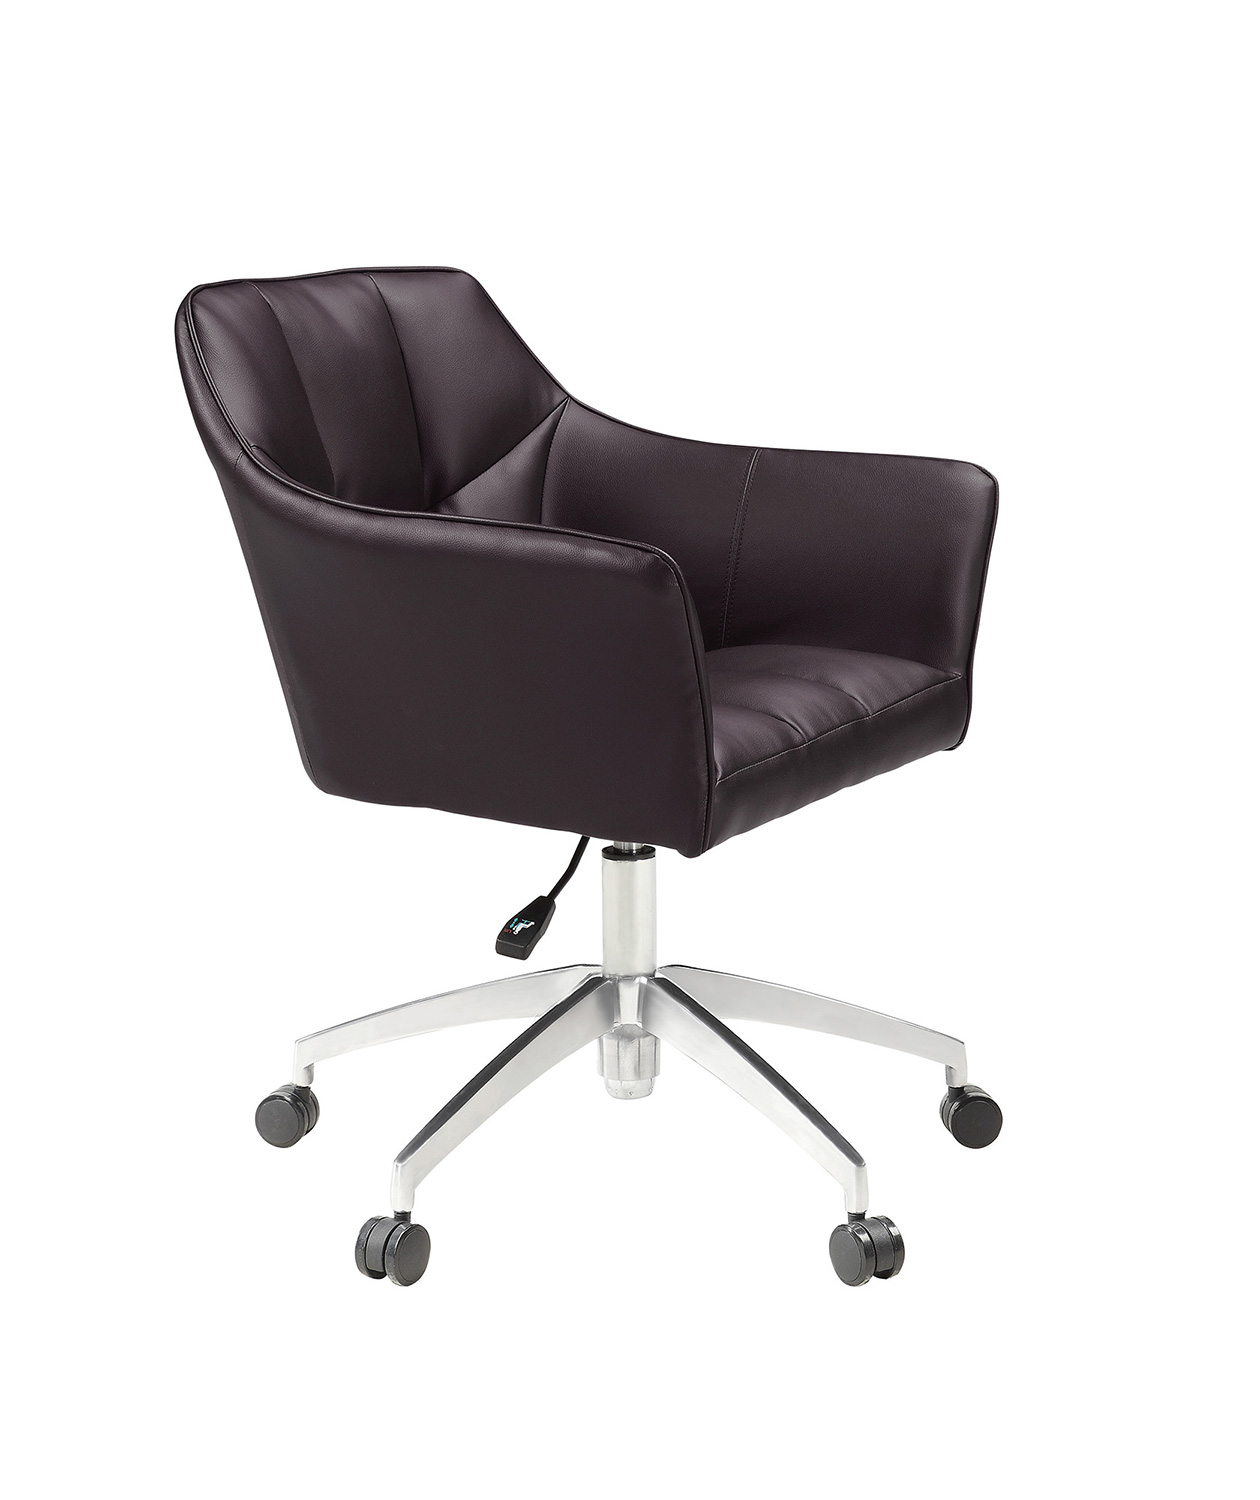 Coaster 801539 Office Chair - Brown/Aluminum